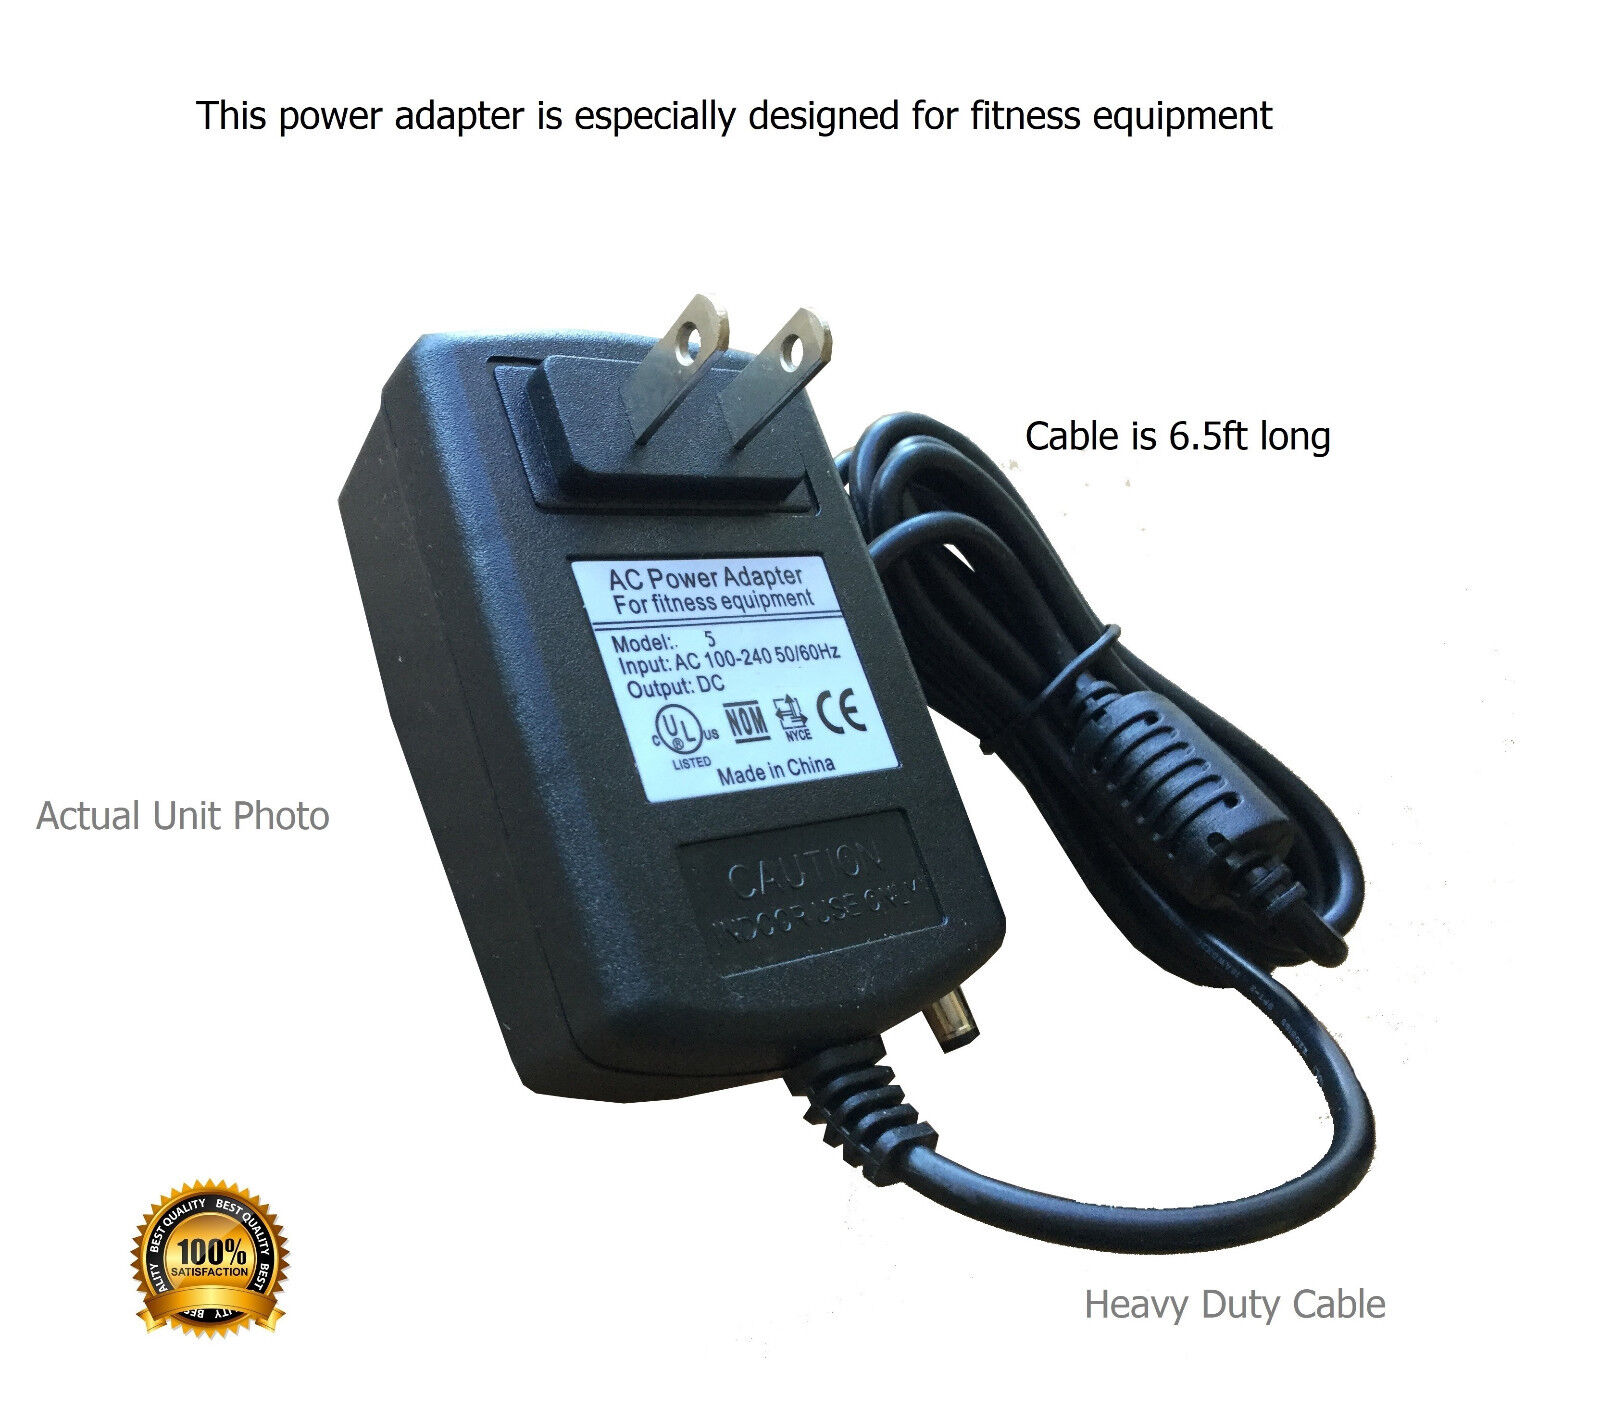 AC Adapter Power Supply for Bremshey Cardio Comfort Pacer Recumbent bike Country/Region of Manufacture China Cable Leng